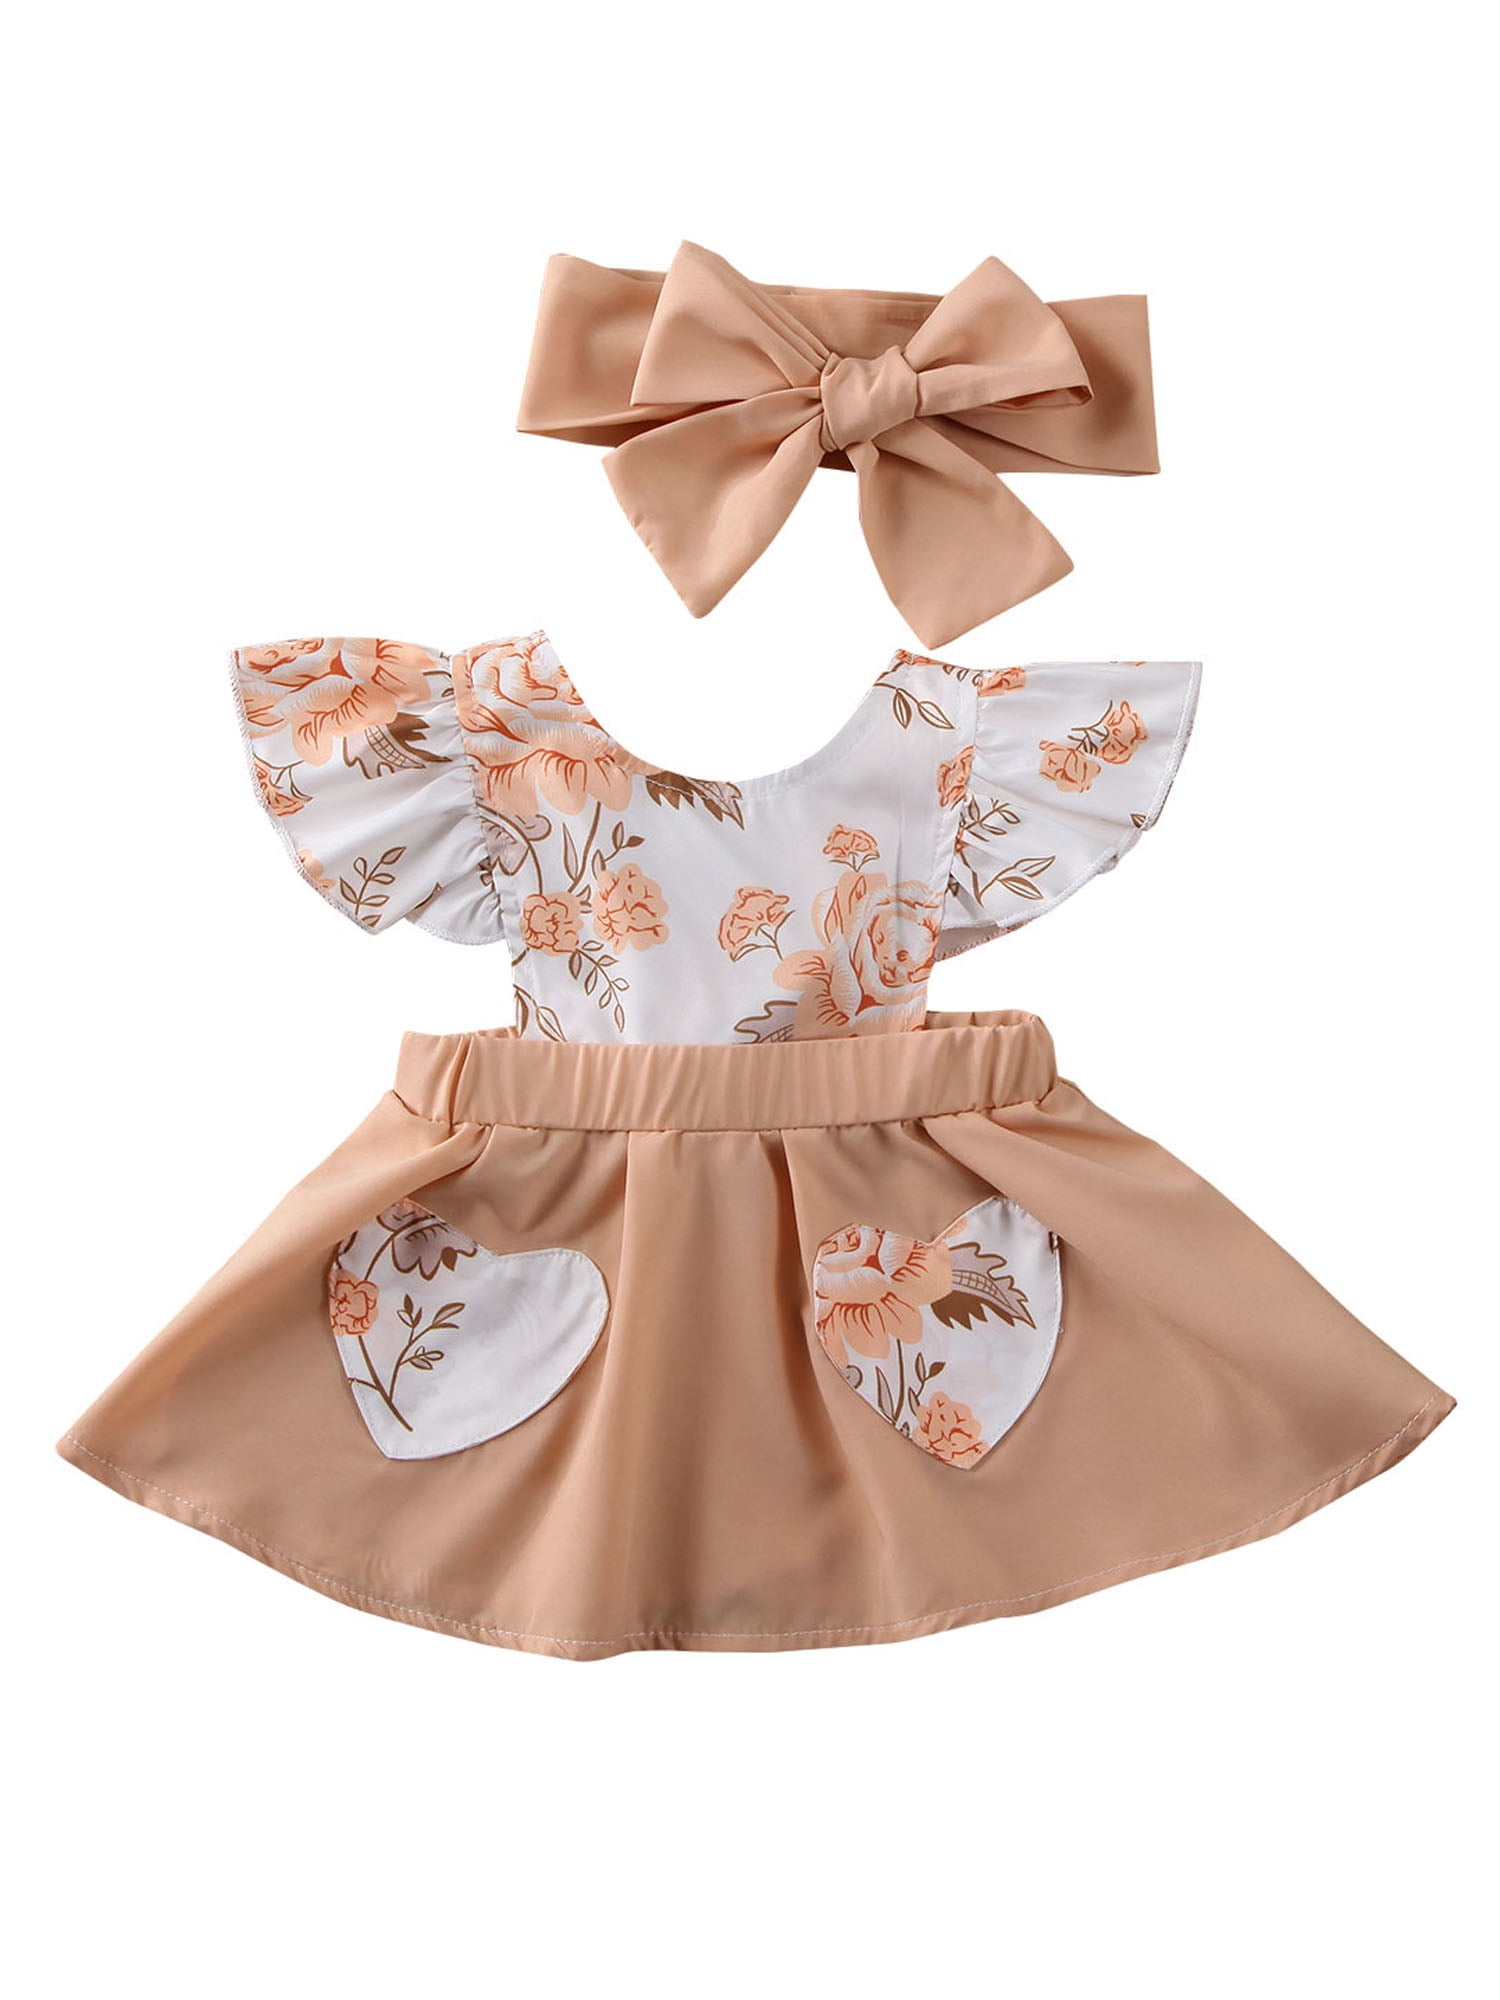 Infant Toddler Baby Girl Clothes Solid Color Ruffle Dress Bloomer Headband Summer Sundress Outfit Set 